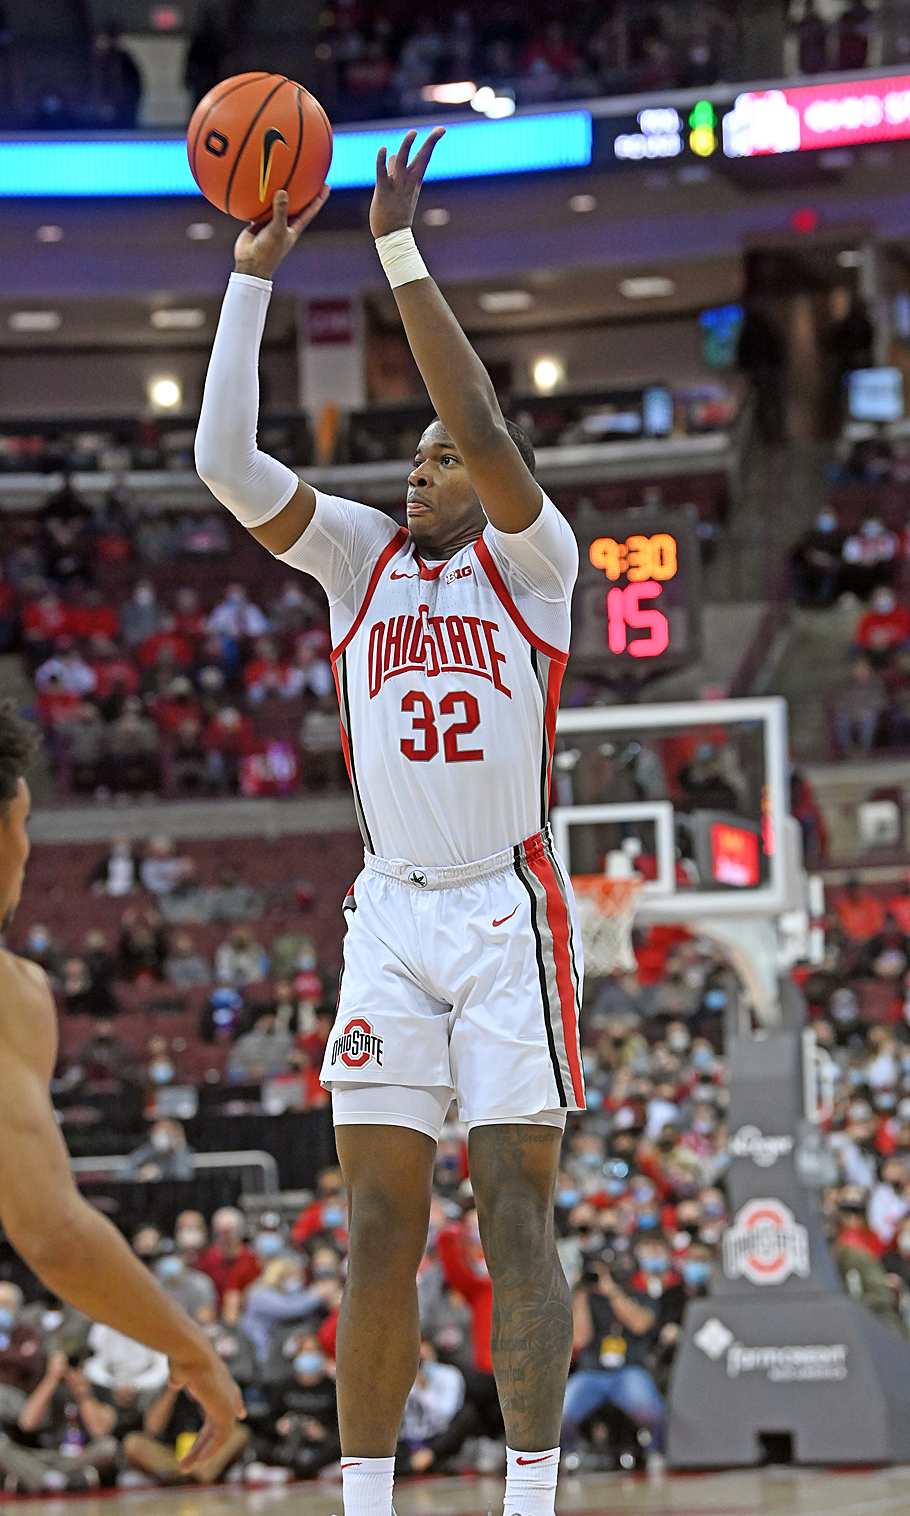 Liddell Returns To Life, Leads Buckeyes, Absent Holtmann